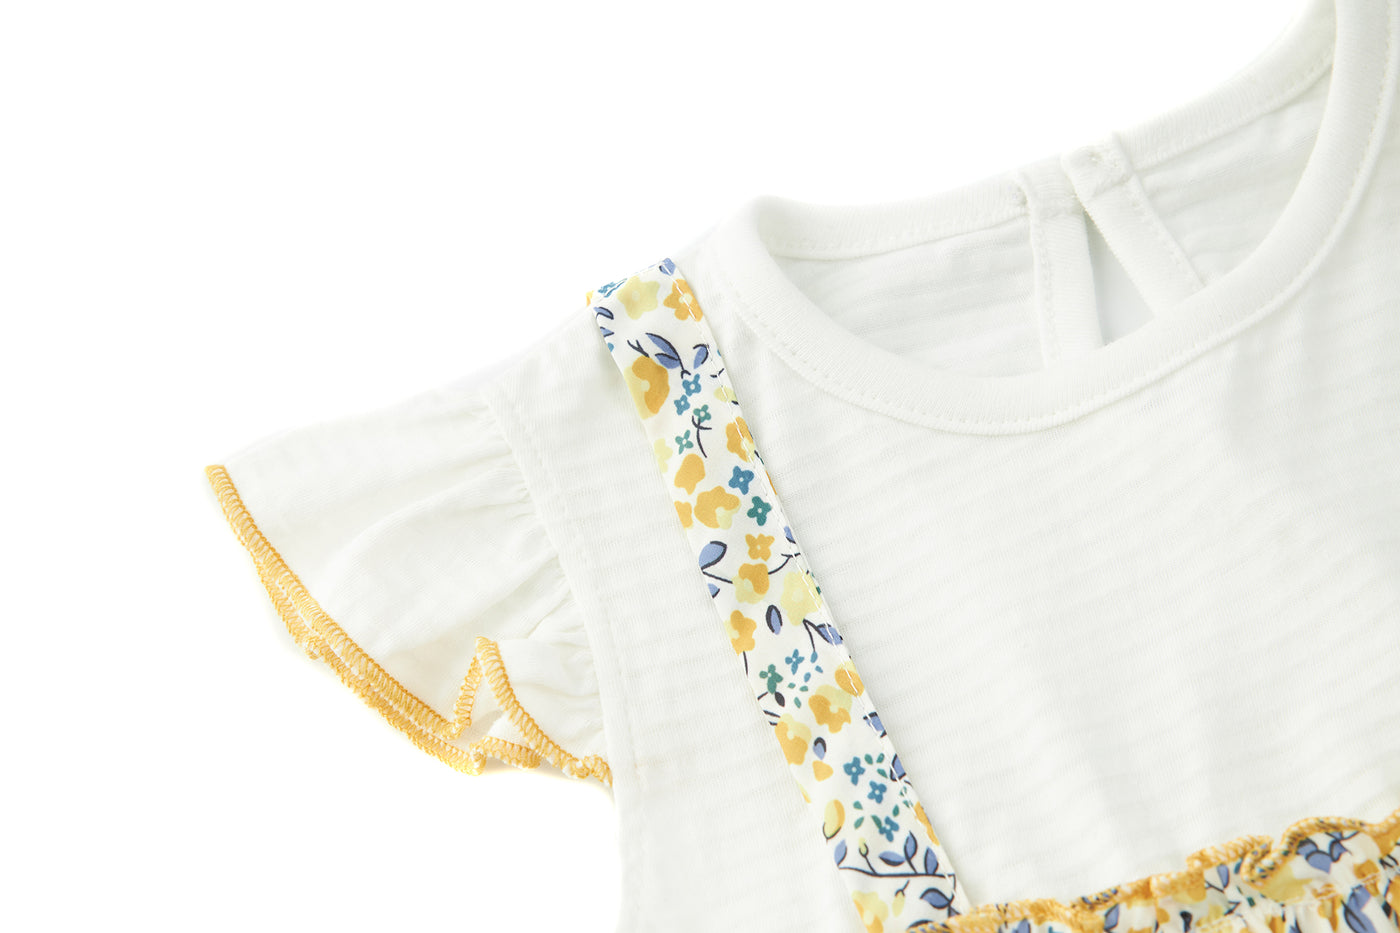 Baby Girl Yellow Floral Ruffled Sleeves Fake Two Pieces Overall Bodysuit Dress - 1118 - Little Kooma